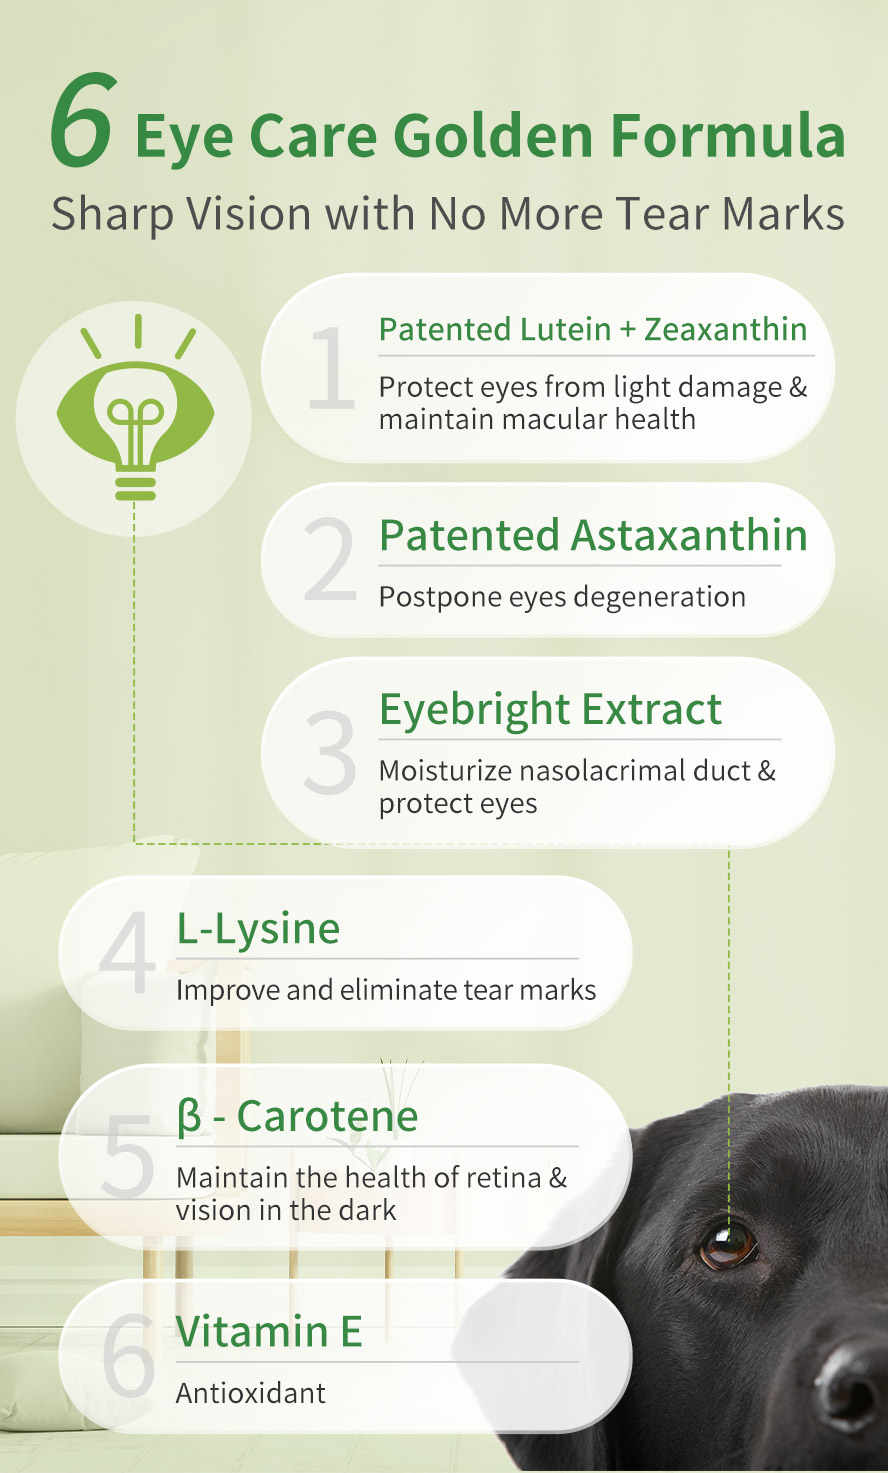 Eye care formulated for dogs with patented lutein, astaxanthin, and complex formula to promote sharp vision and soothe tear marks problem